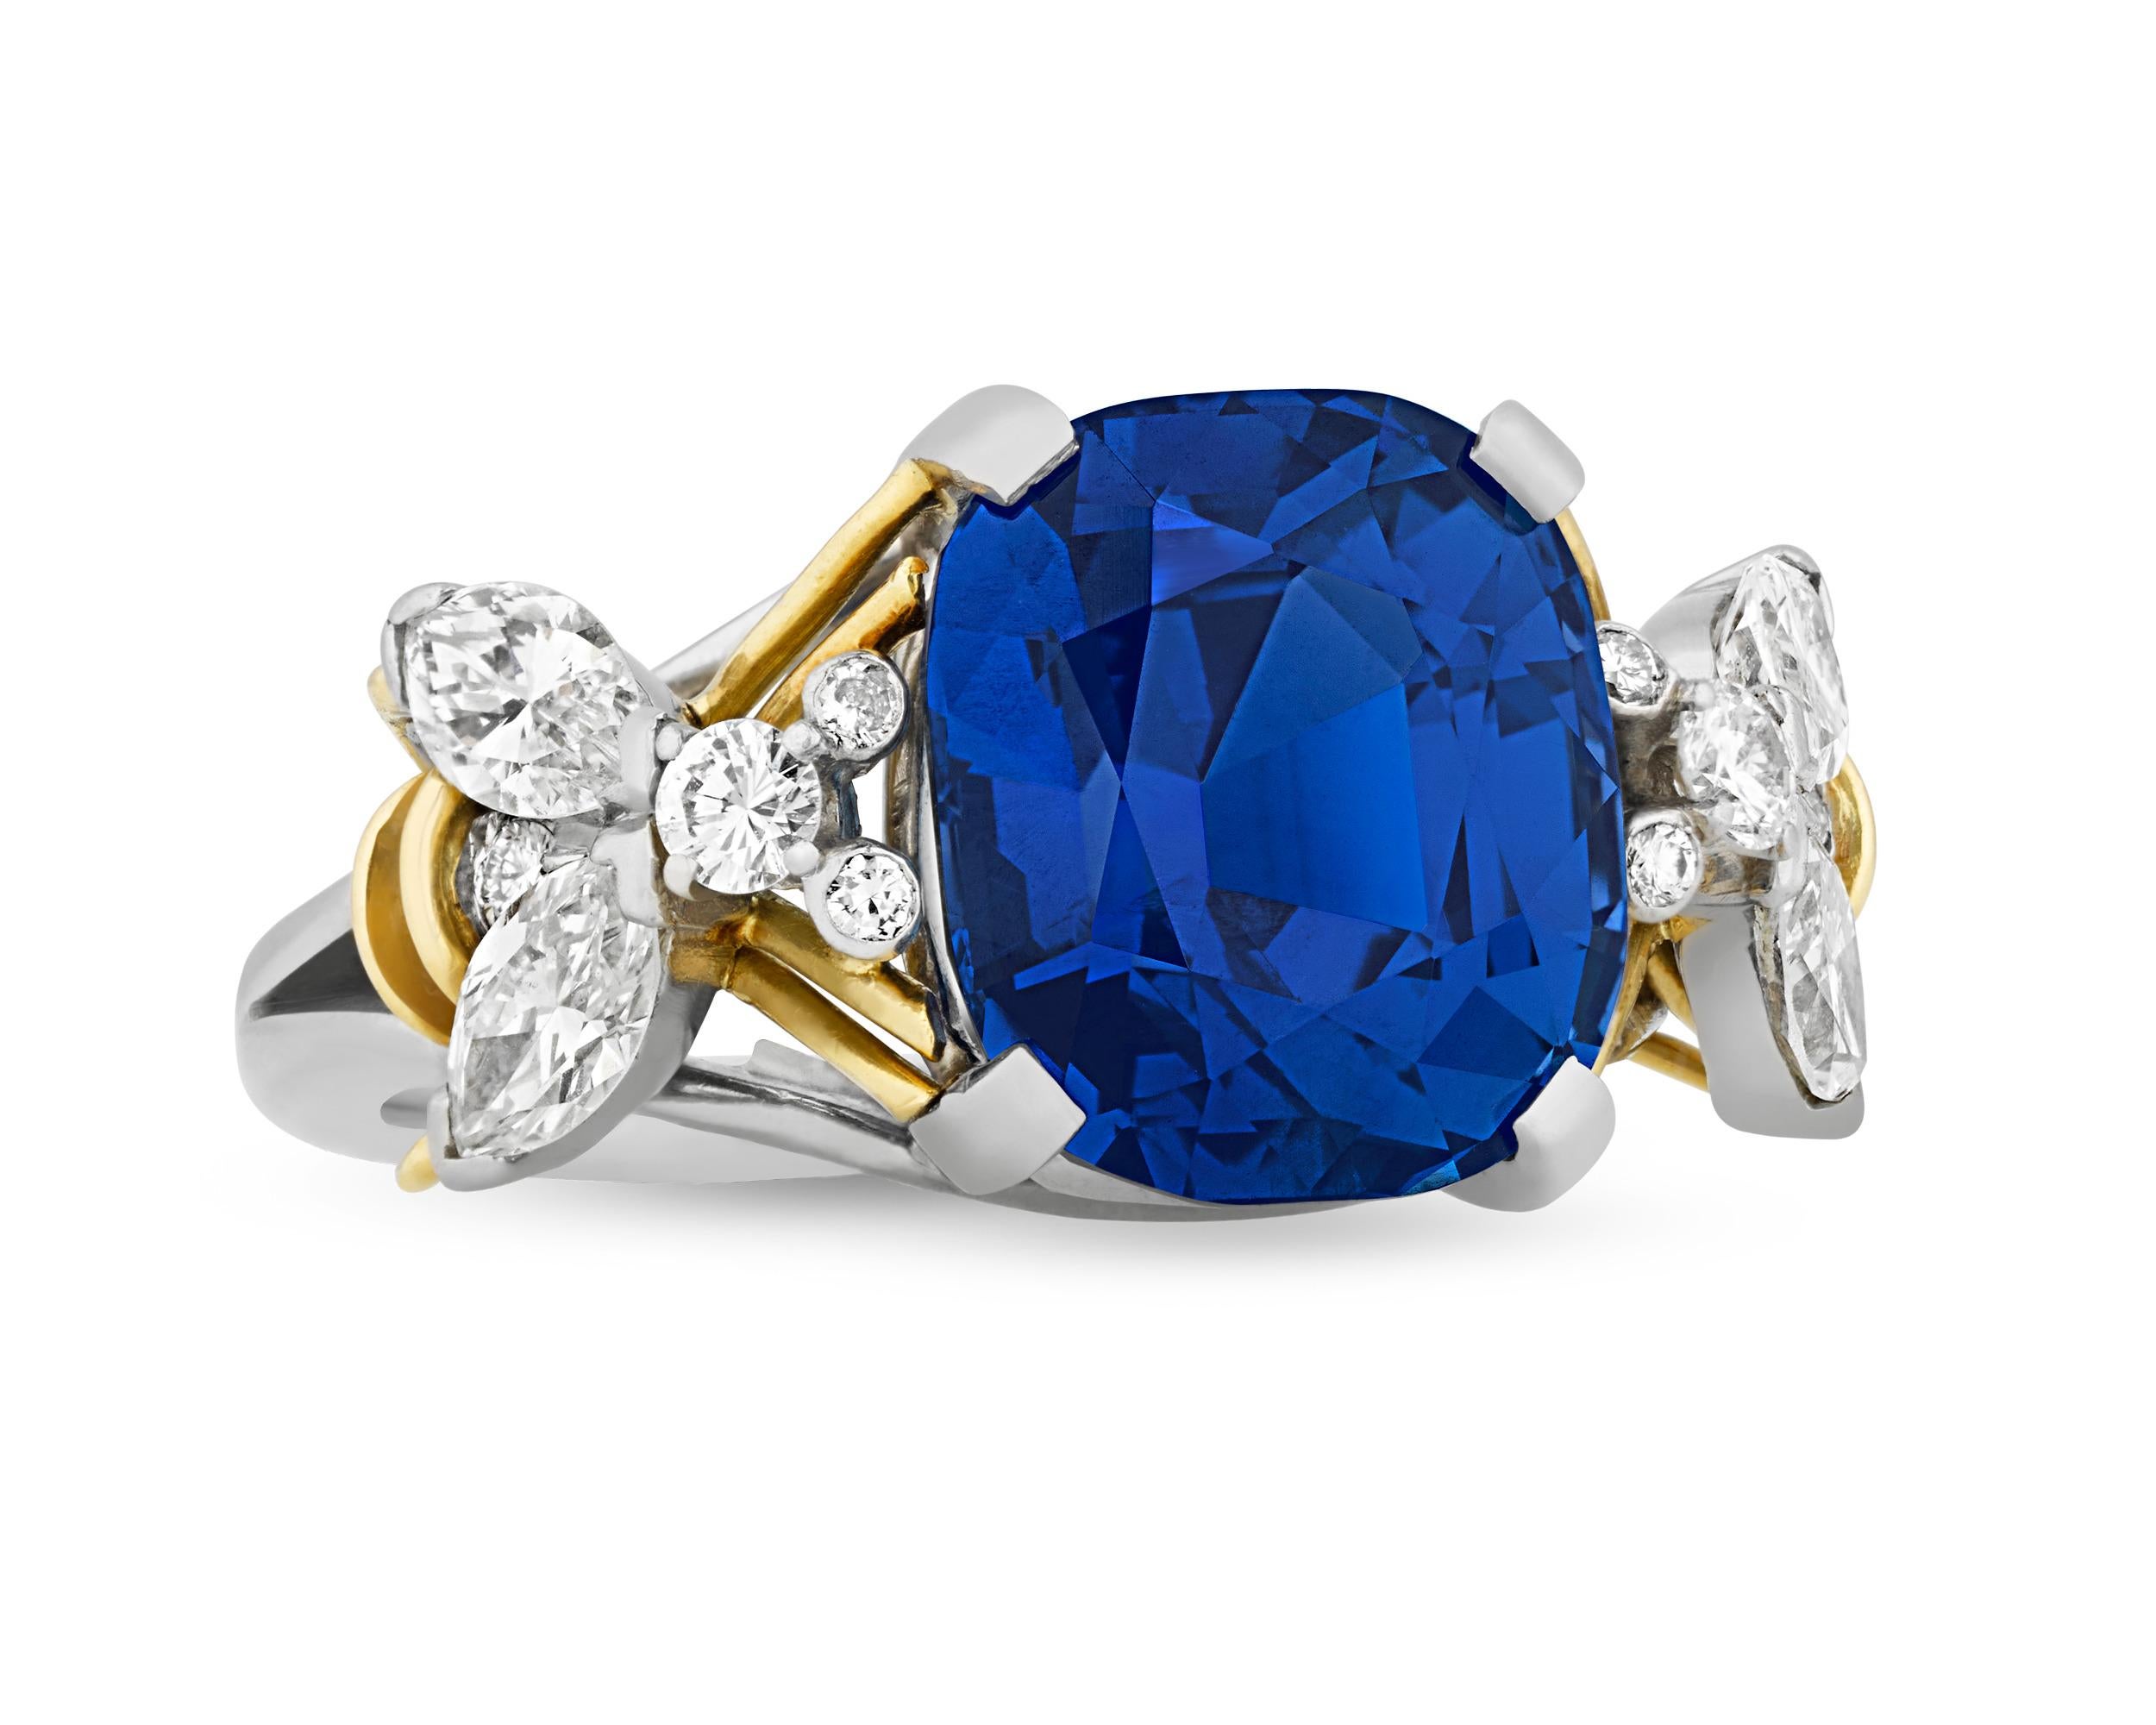 Displaying a luxurious deep blue hue, this ring from the famed firm Tiffany and Co. features an 8.37-carat sapphire. Certified by GemResearch Swisslabs as being Burmese in origin, the colored gemstone displays the prized 